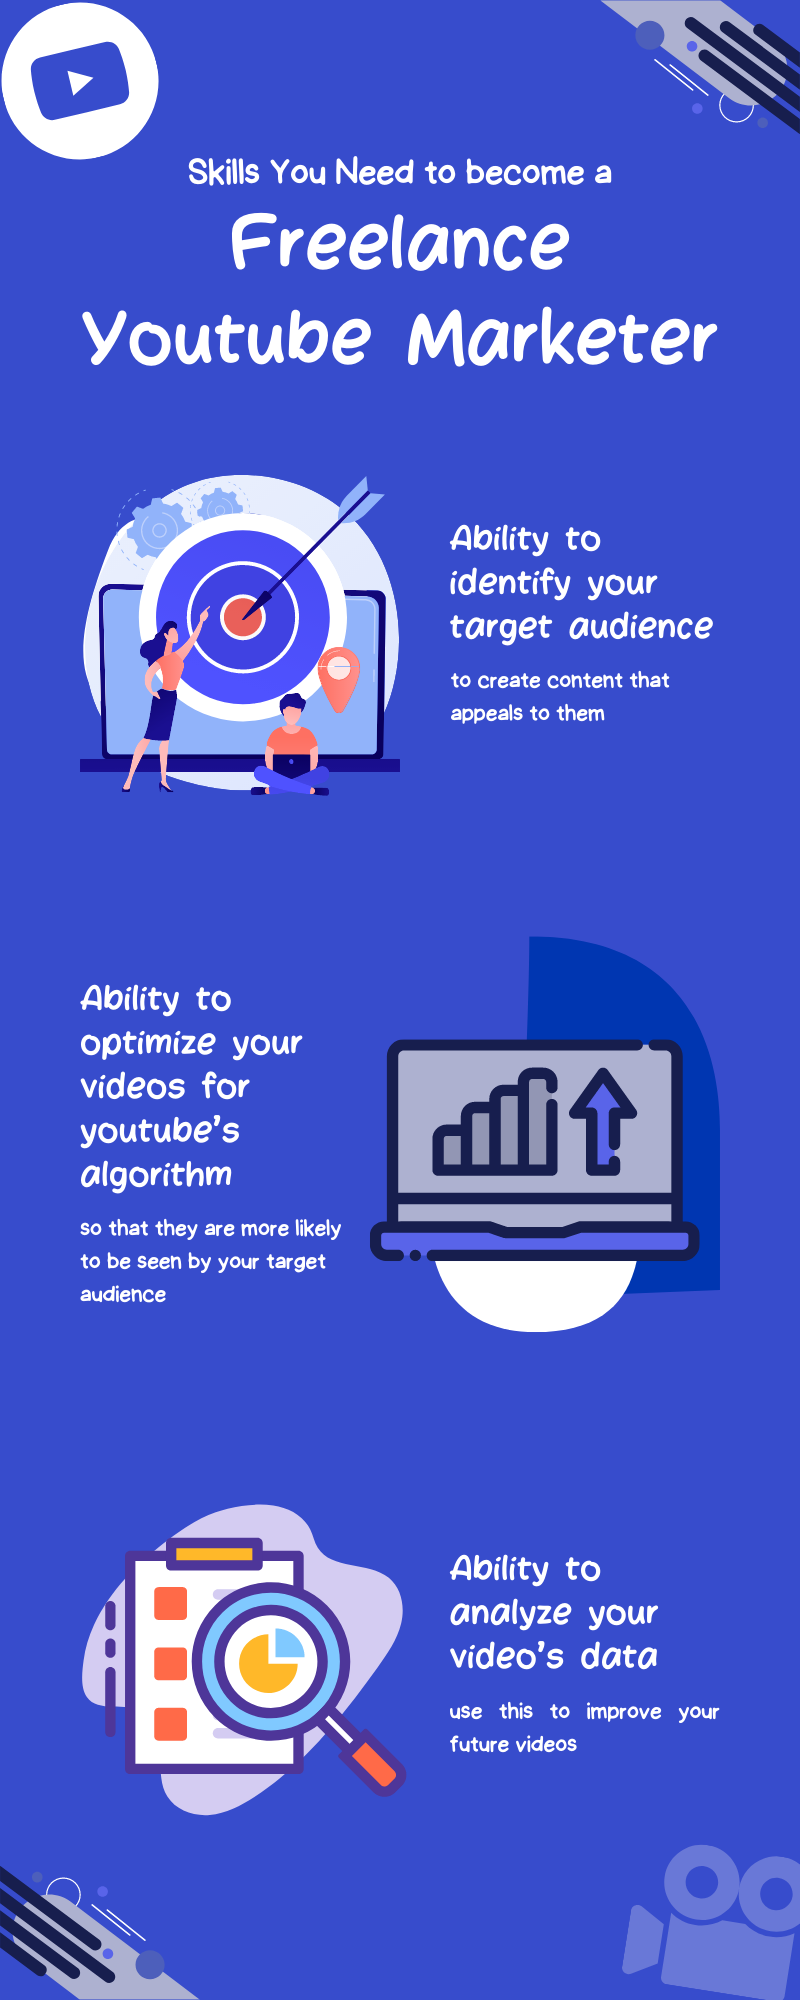 Infographic on Skills You Need to be a Youtube Marketer